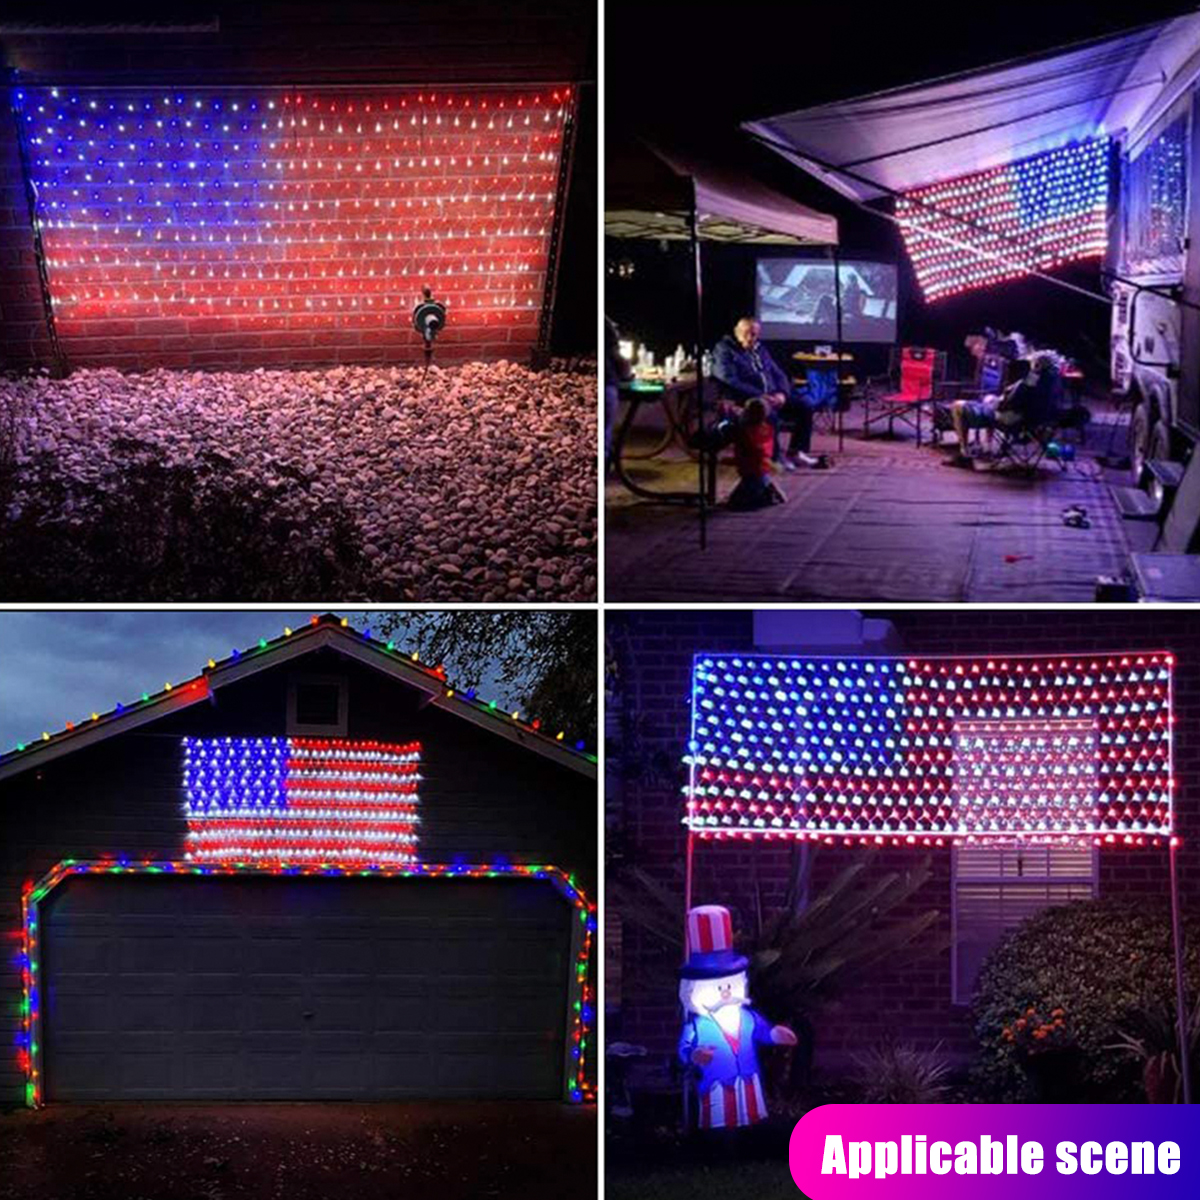 30V-420LEDs-American-Flag-Net-Lamp-Outdoor-Waterproof-String-Light-Yard-Home-Holiday-Decoration-US-P-1732818-10